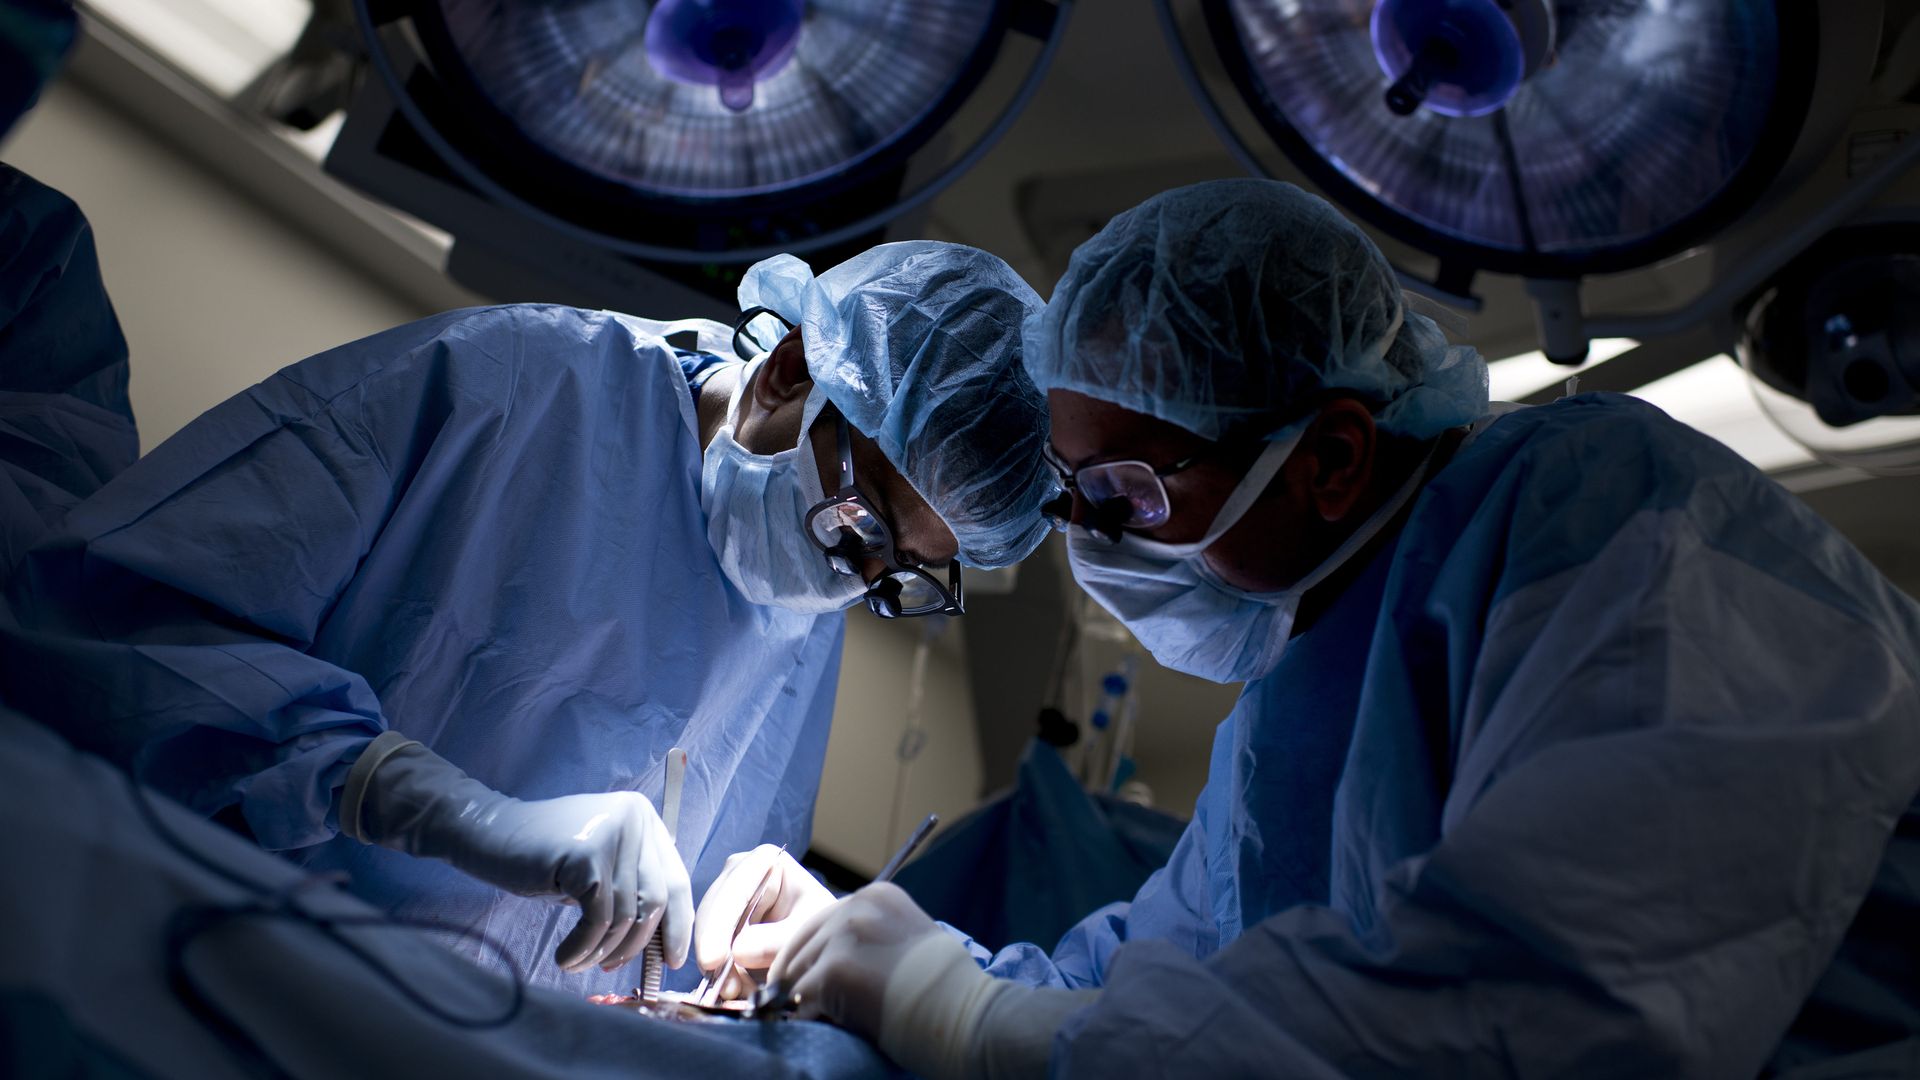 Johns Hopkins surgeons operate on a patient.